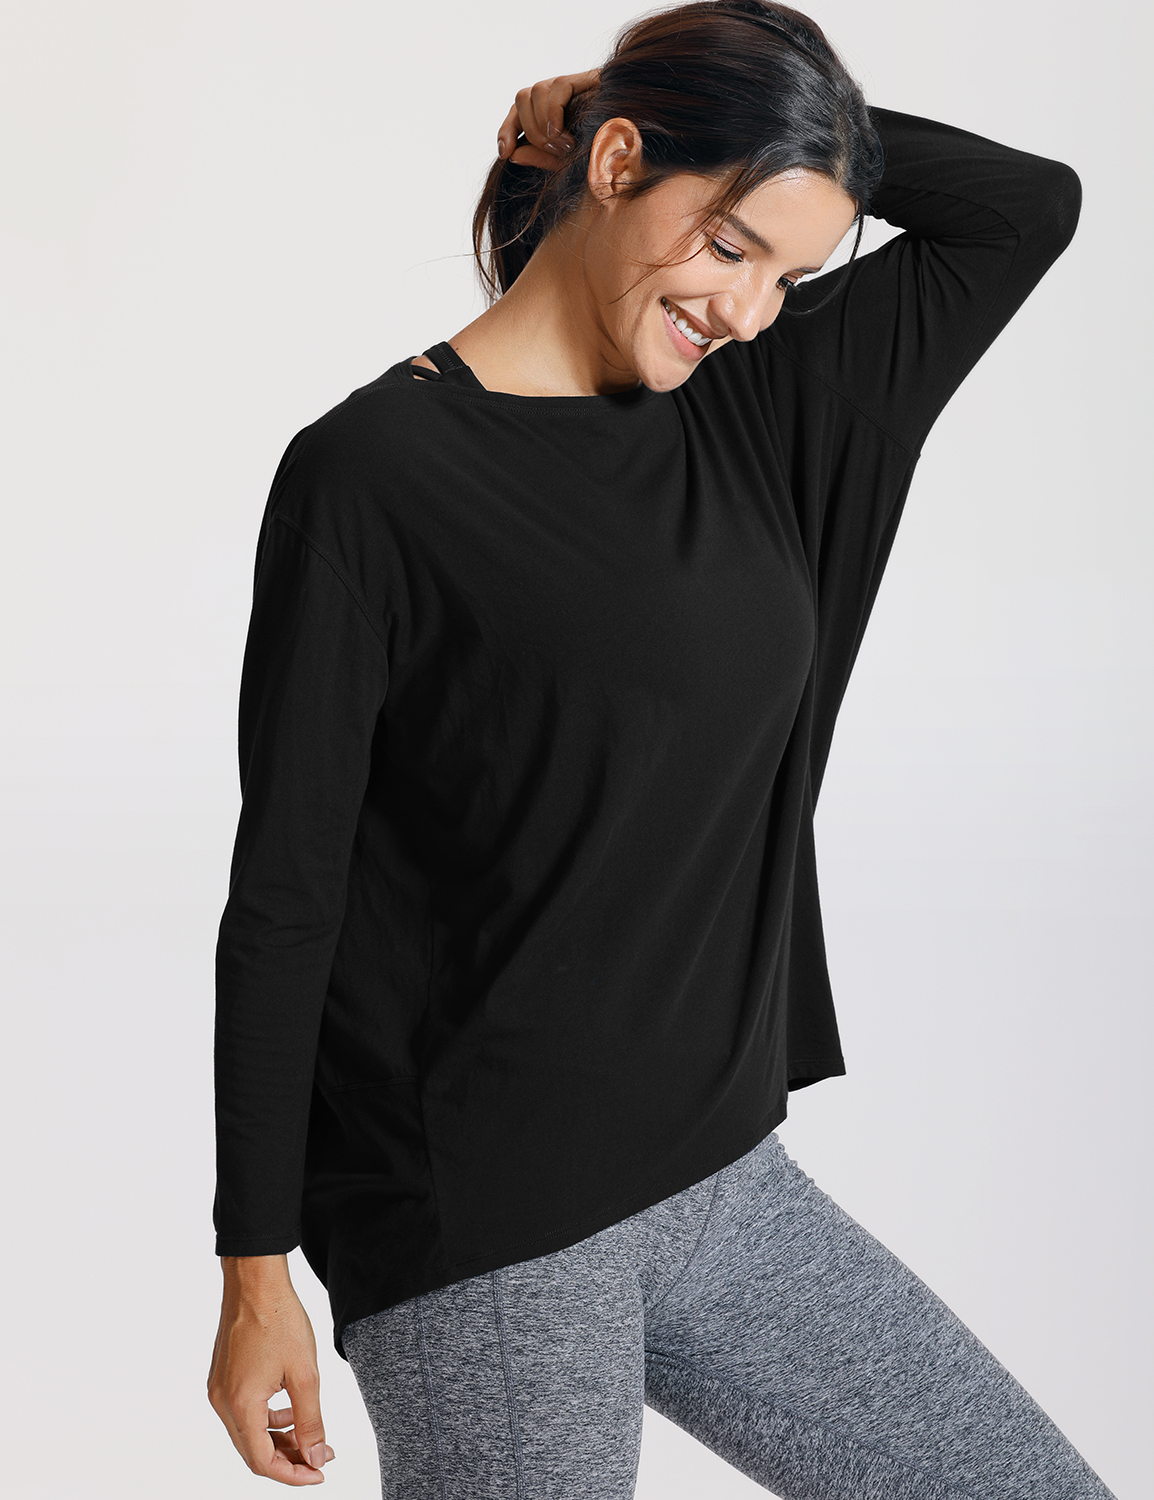 loose fitting workout tops with sleeves down